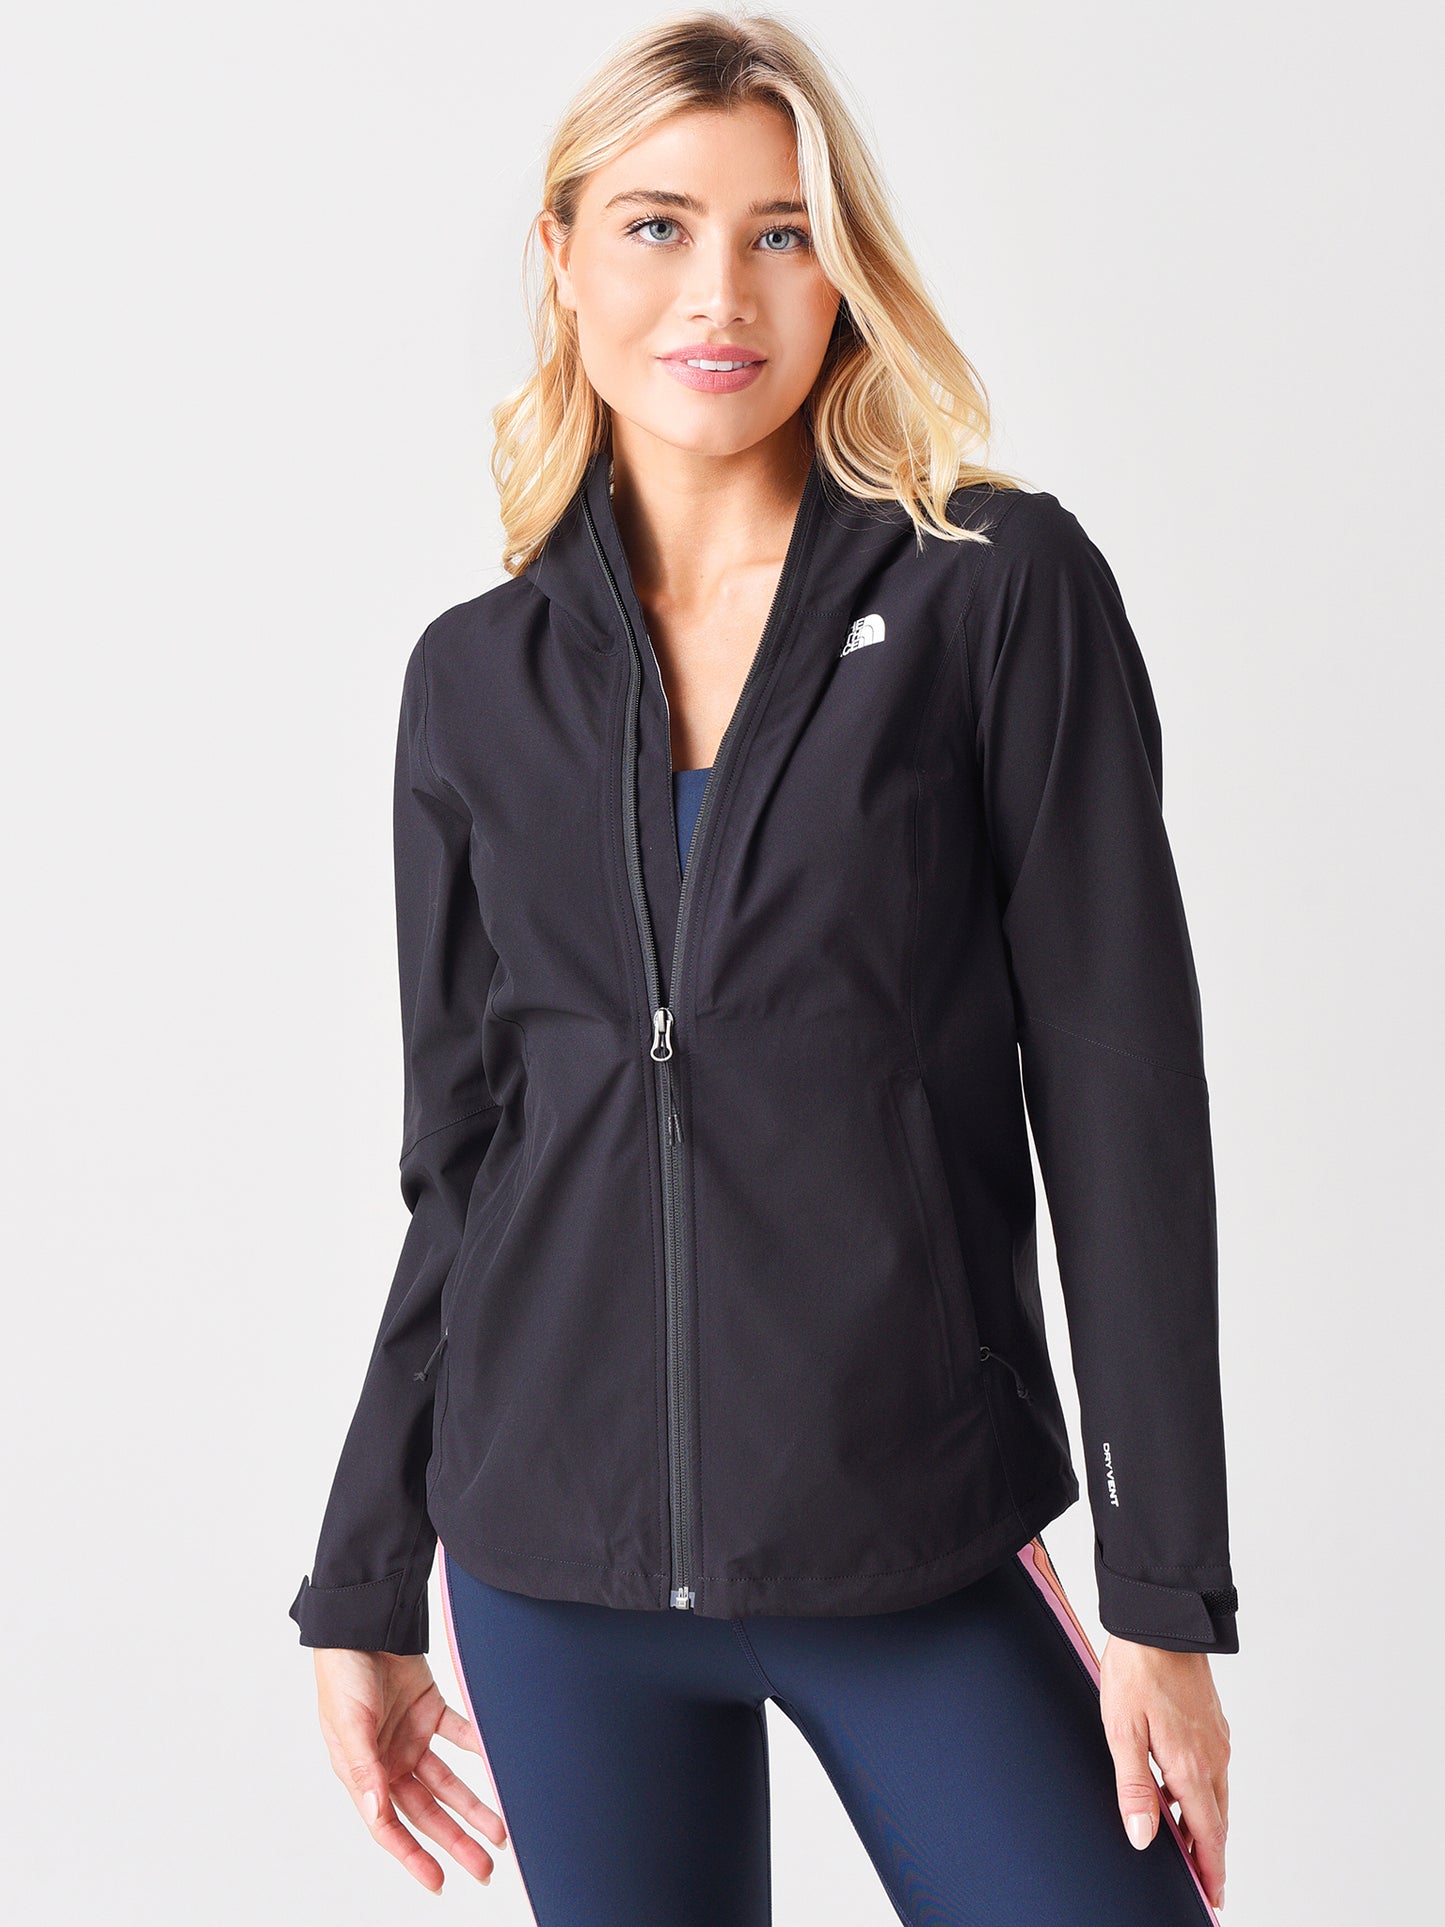 The North Face Women's AllProof Stretch Jacket